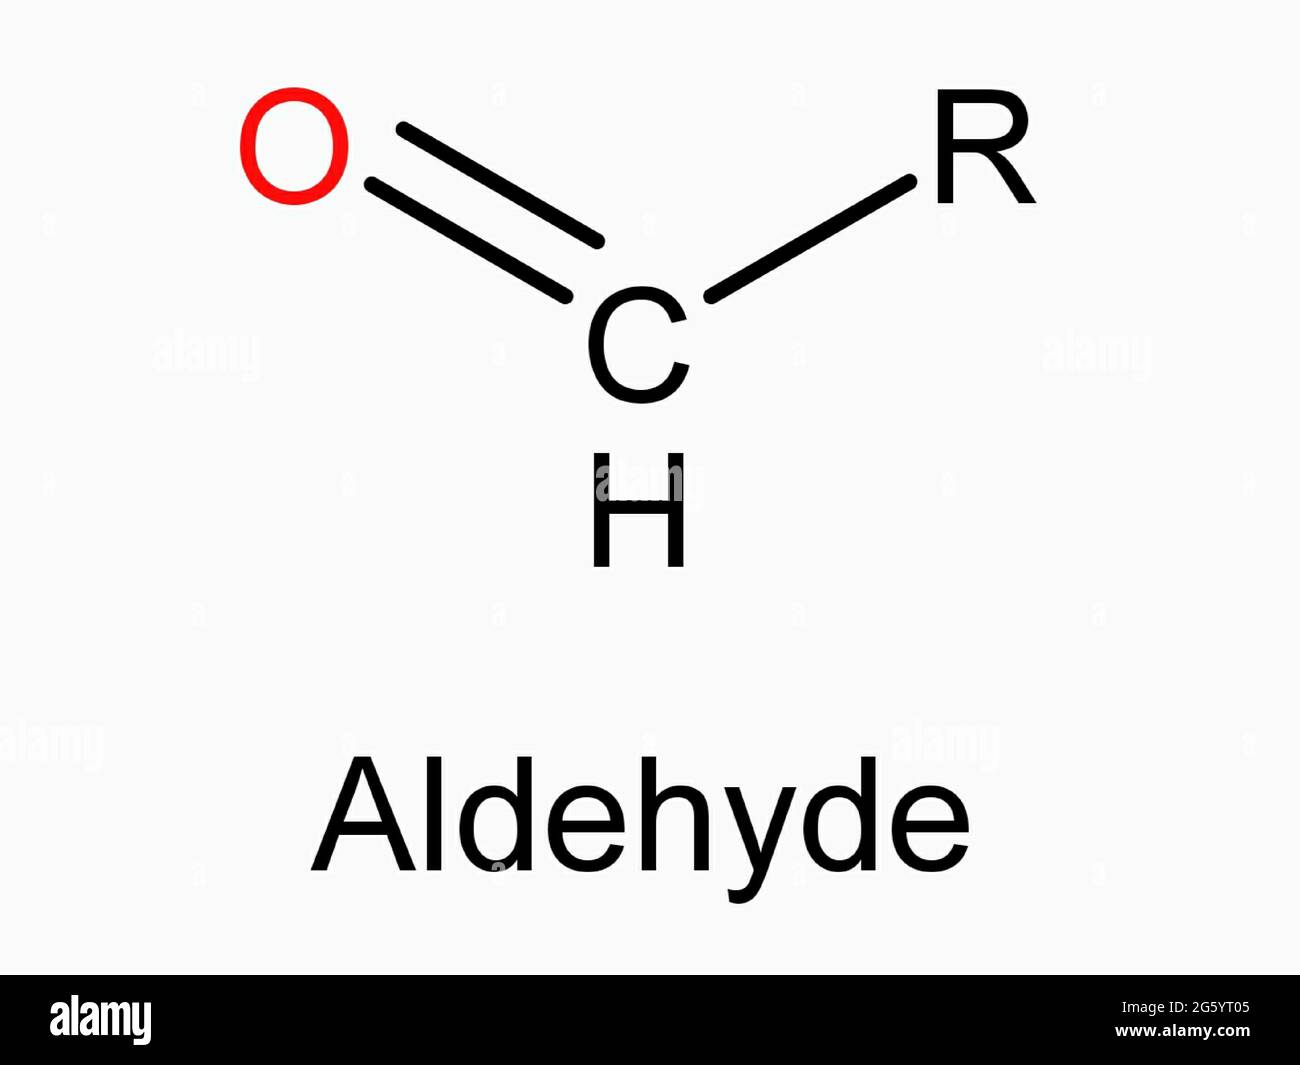 aldehyde functional group molecule atom formula isolated on white background organic chemistry RCHO compound molecular structure carbon hydrogen oxyge Stock Photo